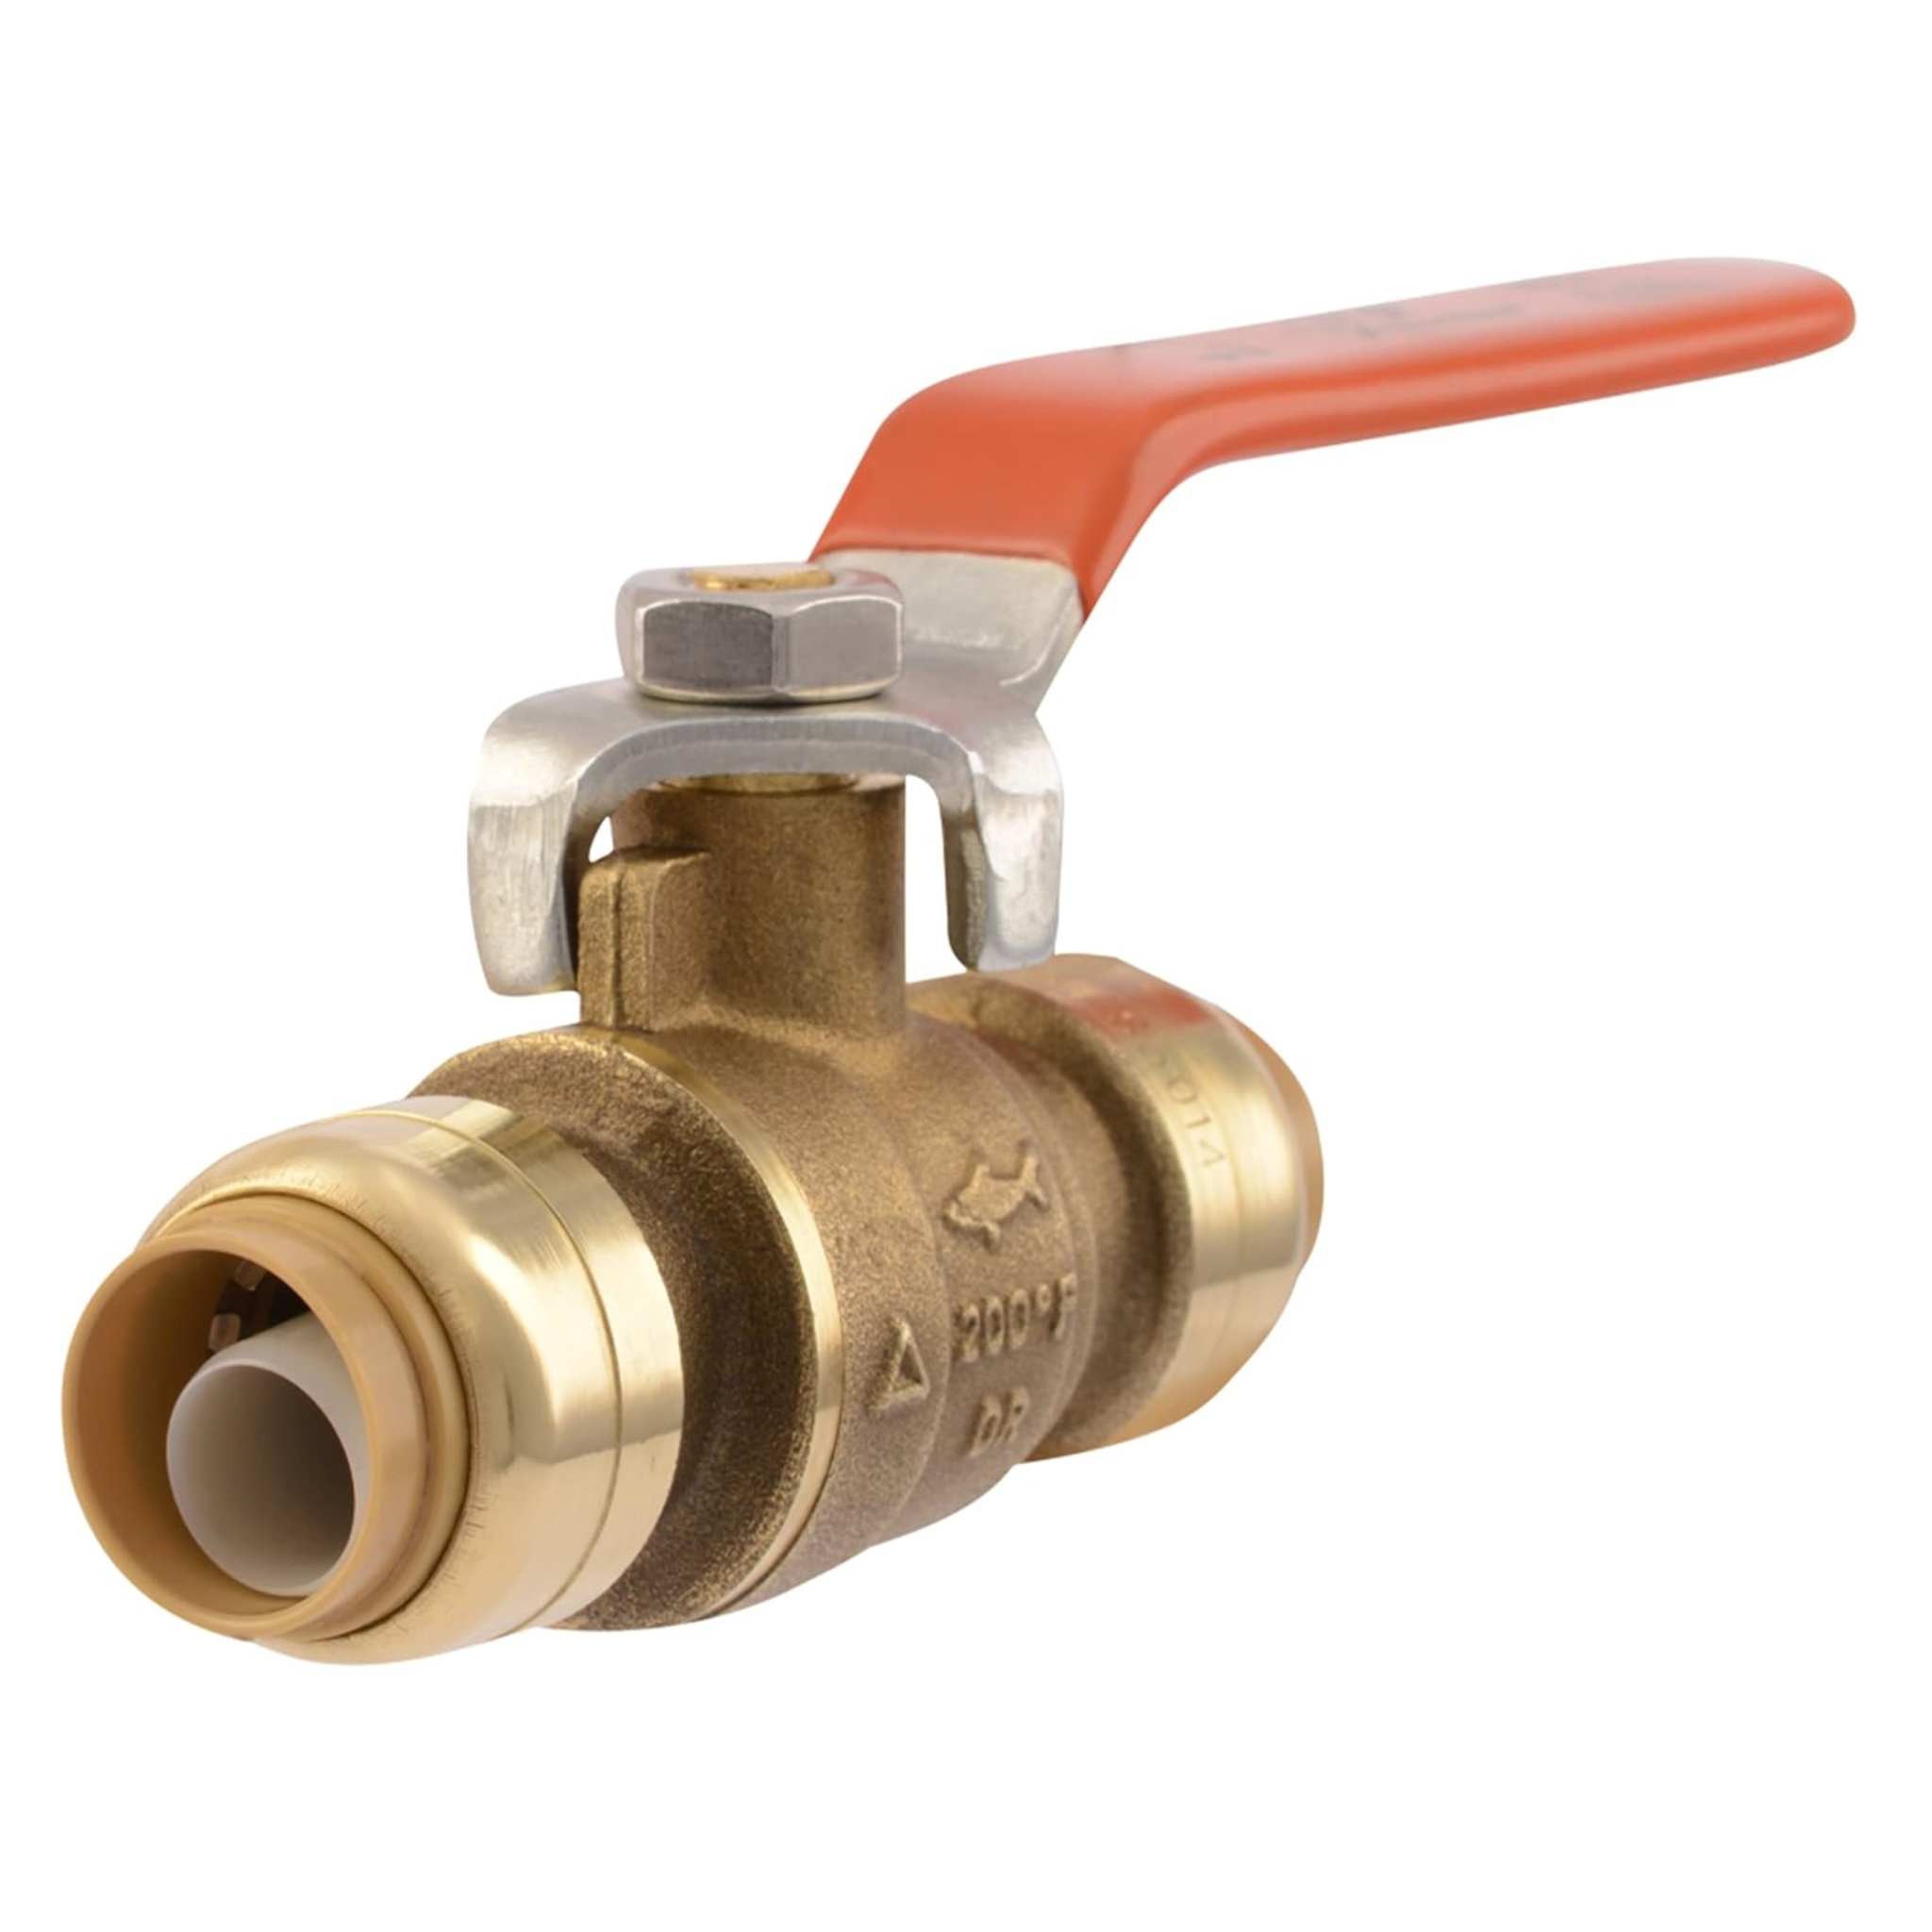 1/2" SharkBite Brass Push-To-Connect Ball Valve Pipe Connector